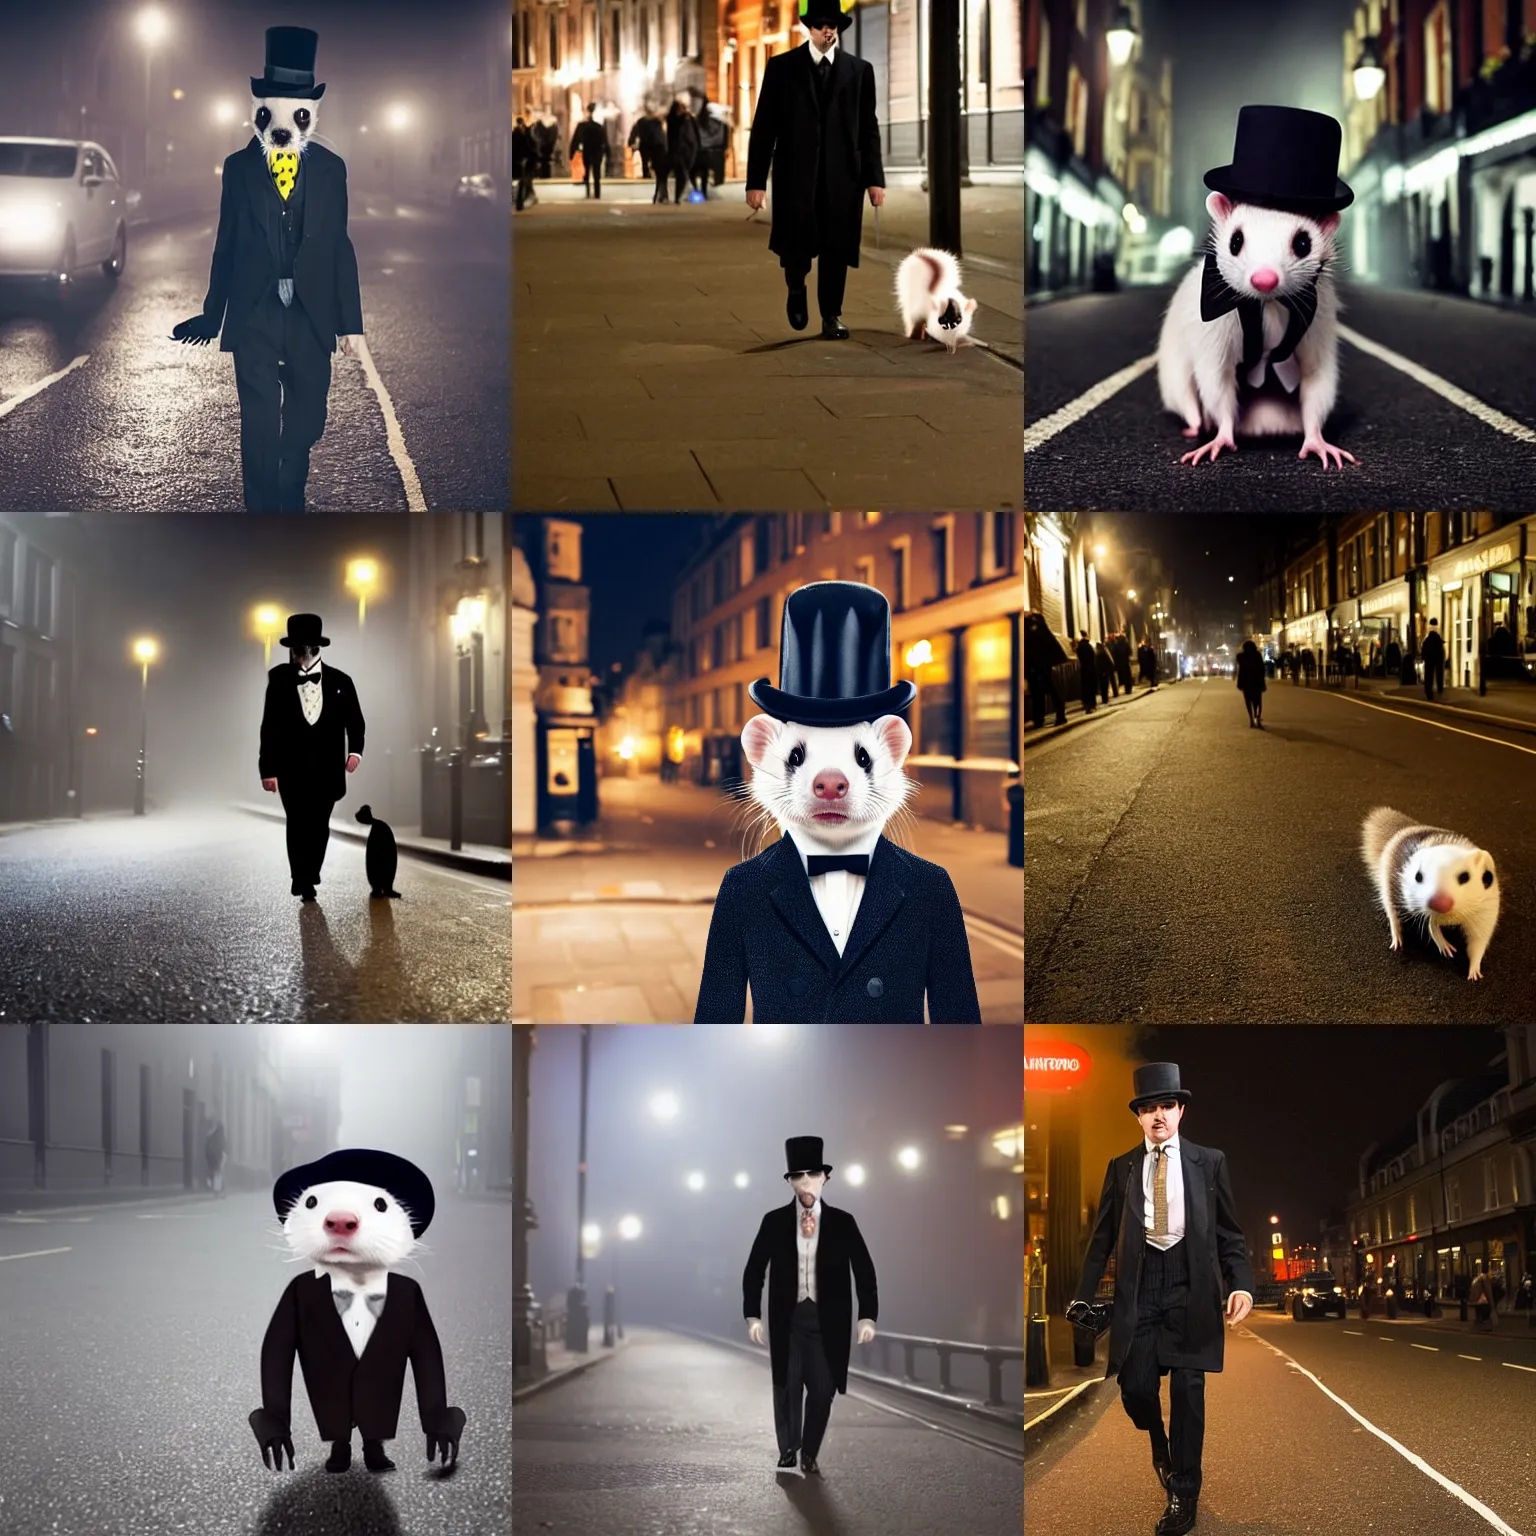 Prompt: a ferret wearing a suit and a bowler hat walking the streets of foggy london by night